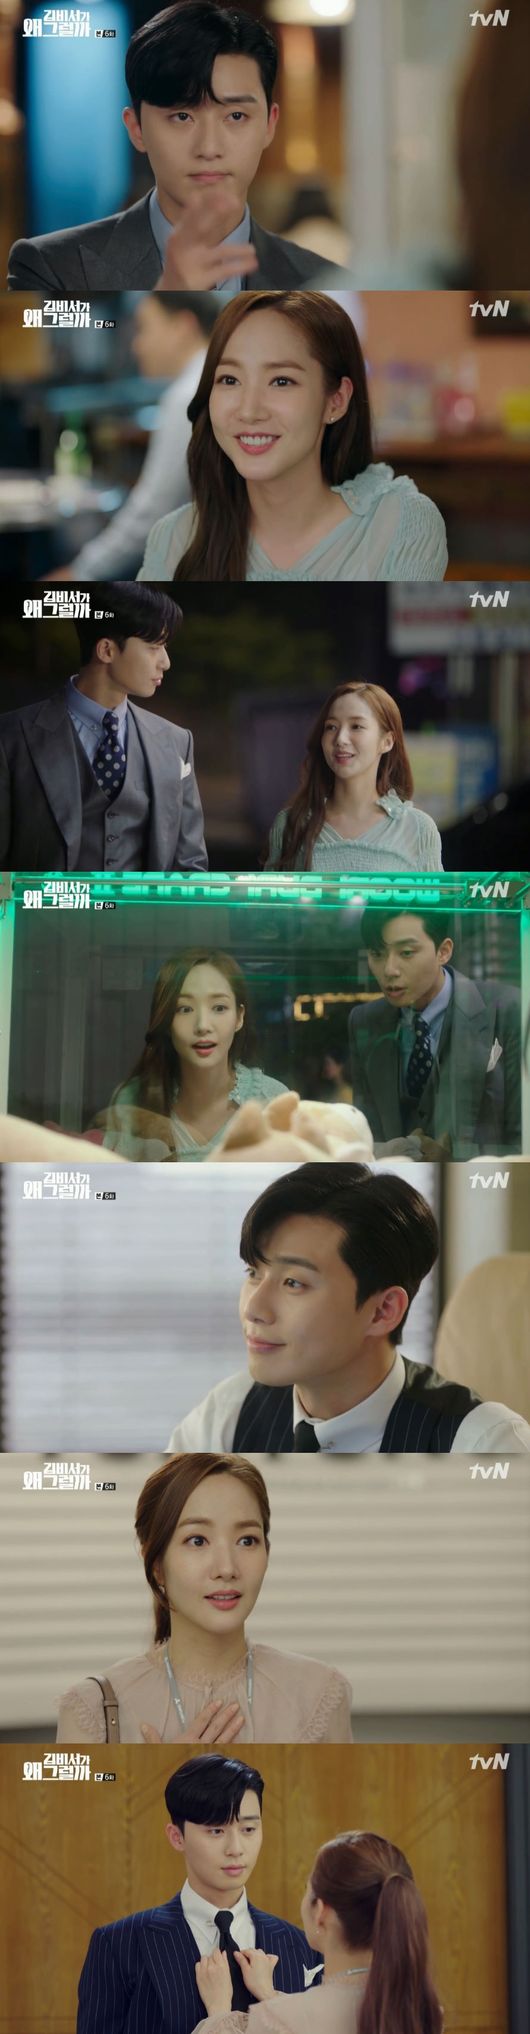 Why is Kimbi? Park Seo-joon and Park Min-young became single couples in the Loco craftsman couple.It makes viewers happy with a tickling figure on a thumb, then blushes with a misunderstood look.In the 6th episode of the drama Why is Kimbi Seo? (playplayed by Baek Sun-woo, directed by Park Joon-hwa) broadcast on the afternoon of the 21st, Kim Mi-so (Park Min-young) was shocked by the memory that Lee Sung-yeon (Lee Tae-hwan) was not Lee Young-joon (Park Seo-joon).Young Jun confessed to Smile, I want to shake Kimbi. He came to Smile who gave a monthly car and gave consideration to send a Kimbi-oriented schedule.Eating shells and doing a Prize Claw, trying to make a smile like it, while comforting the smile that had long been sacrificed for the family.I say that sacrifice life is worth it, but its not really like that; its just losing myself in the loss; the most important thing at any moment is yourself.Do not lose my self-esteem and priority at any moment. It was a special comfort to the smile that lived only in the sacrifice life and the comfort of Young Jun-sik, who was strong in self-love.In fact, the smile said, The words like the crystal of the vice chairmans narcissism are comforting.Young-joon then showed a thrilling reminder of the time he spent with a smile during the day.I challenged the Prize Claw to present to the smile, and the company also made a smile and a sweet appearance.But the sweetness stopped here, not knowing that the smile was not Young Jun but the brother who was with him at the time. In Memory, he introduced his name as Lee Sung Yeon.But no one can confirm this. Young-joon said that the abducted person was not his brother, and that Sung-yeon could not remember the moment of the abduction in detail.In addition, Sung Yeon saw Young Juns scar on the smile.He insisted, I made my friends on my side with that smart head and ate with them and bothered me. This is a contradictory claim to the past that Young Jun had previously confessed.The two of them had a sudden kissing look and showed a full-fledged ride and made a radical advance to the love line.As they approach the truth of the past, the dark side is revealed, and the two seem to be caught up in an unsettling development.Why would Kimbi do that? Capture the broadcast screen.